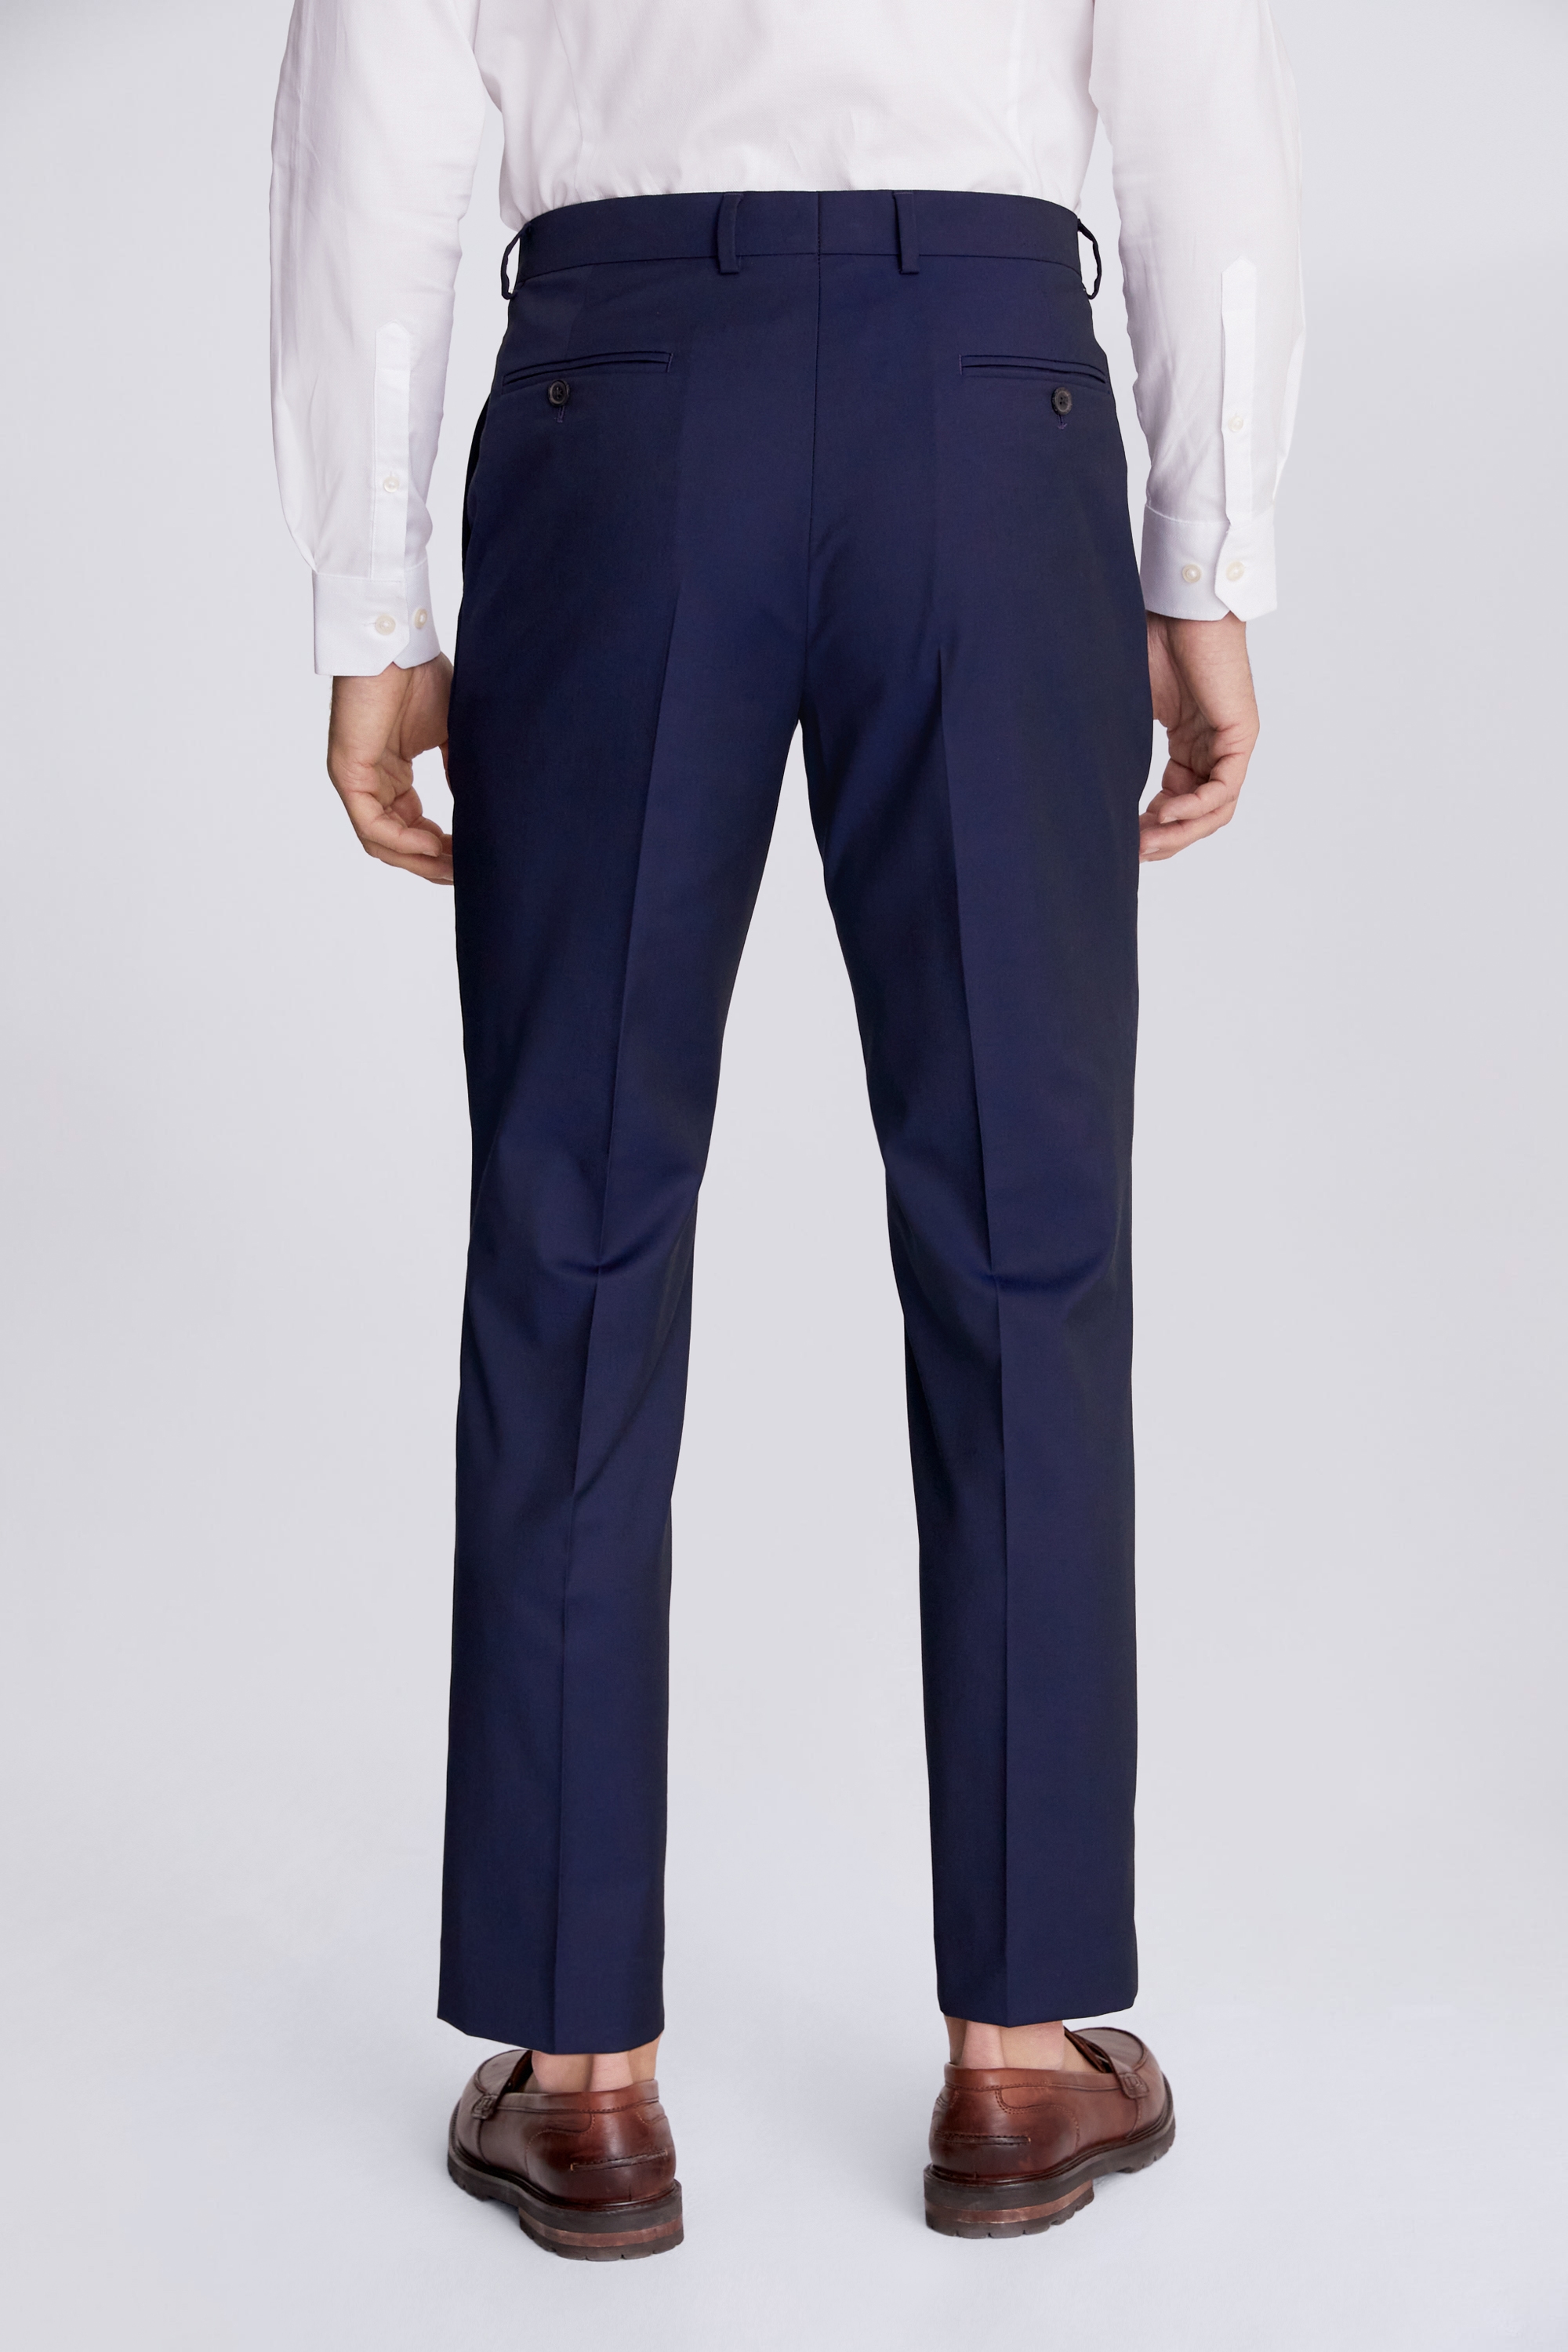 Regular Fit Ink Stretch Trousers | Buy Online at Moss